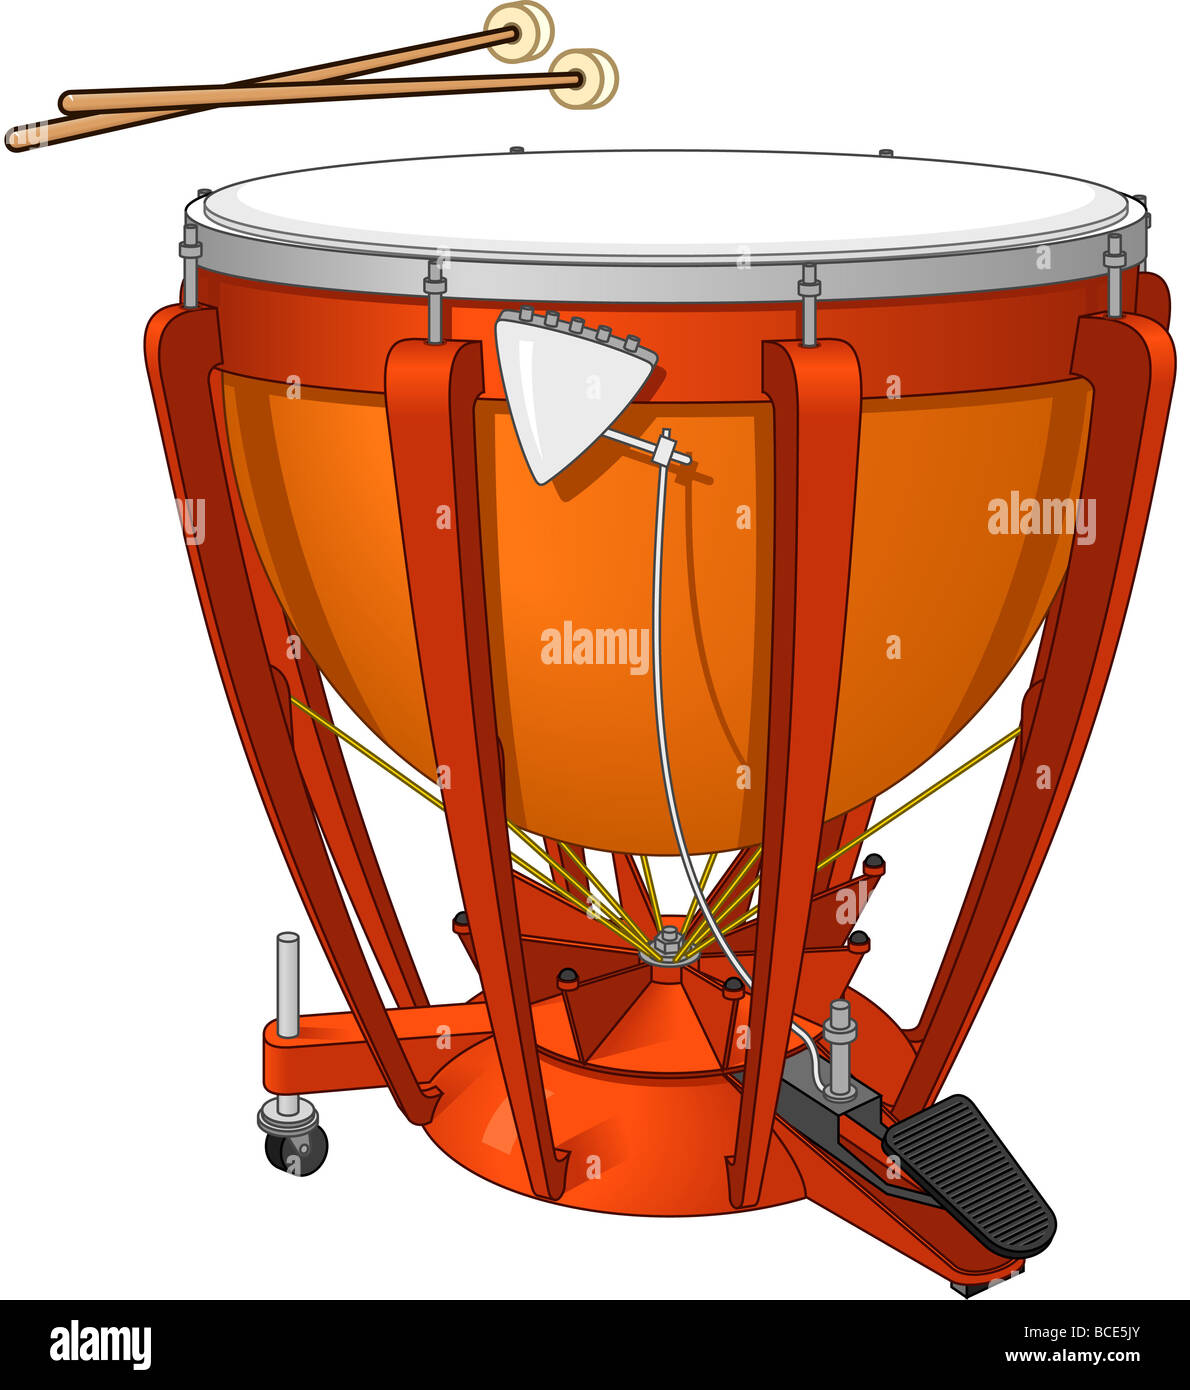 Timpani, or kettledrum, and drumsticks. Stock Photo